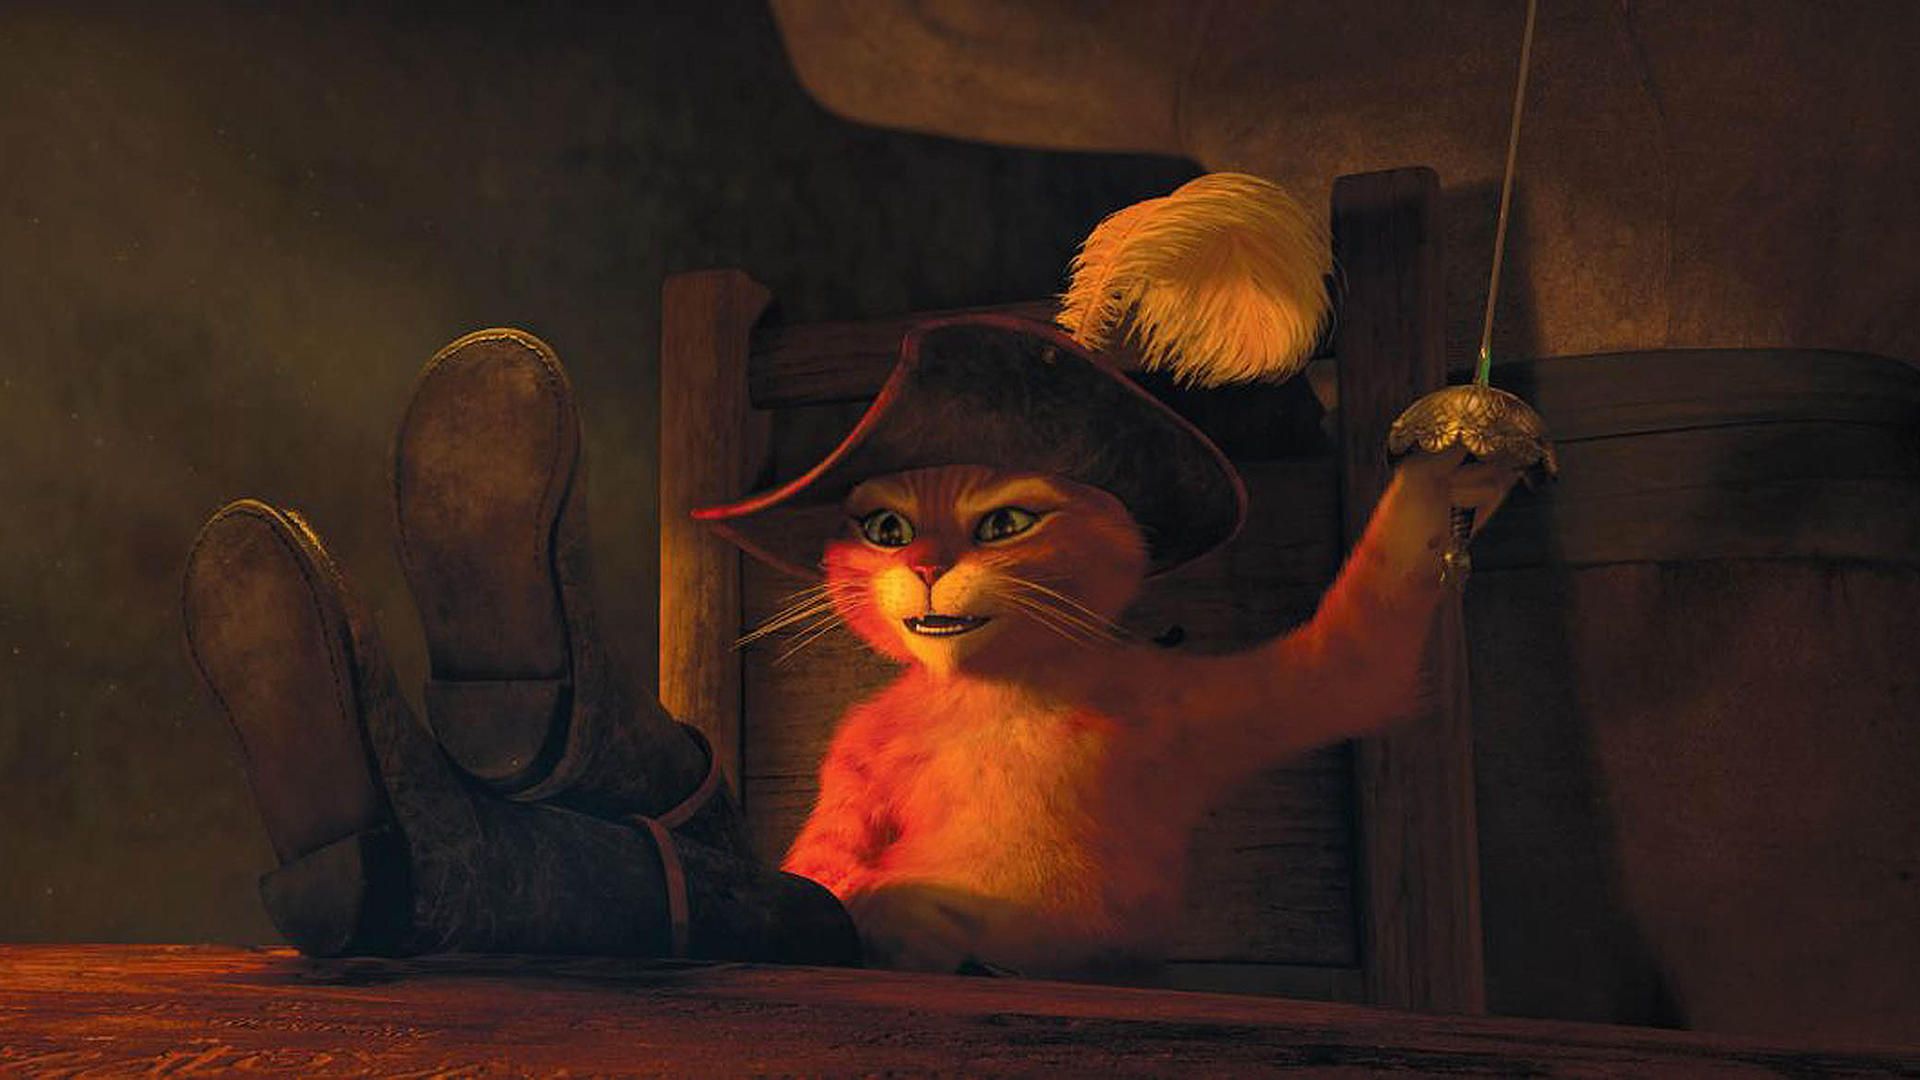 <p>                     A swashbuckling animated adventure film about an outlaw cat, his childhood egg-friend, and a seductive thief kitty who set out in search of the eggs of the fabled Golden Goose to clear his name, restore his lost honor, and regain the trust of his mother and town. With the voices of Antonio Banderas and Salma Hayek, this 2011 movie was nominated for an Oscar, and won 10 movie awards.                    </p>